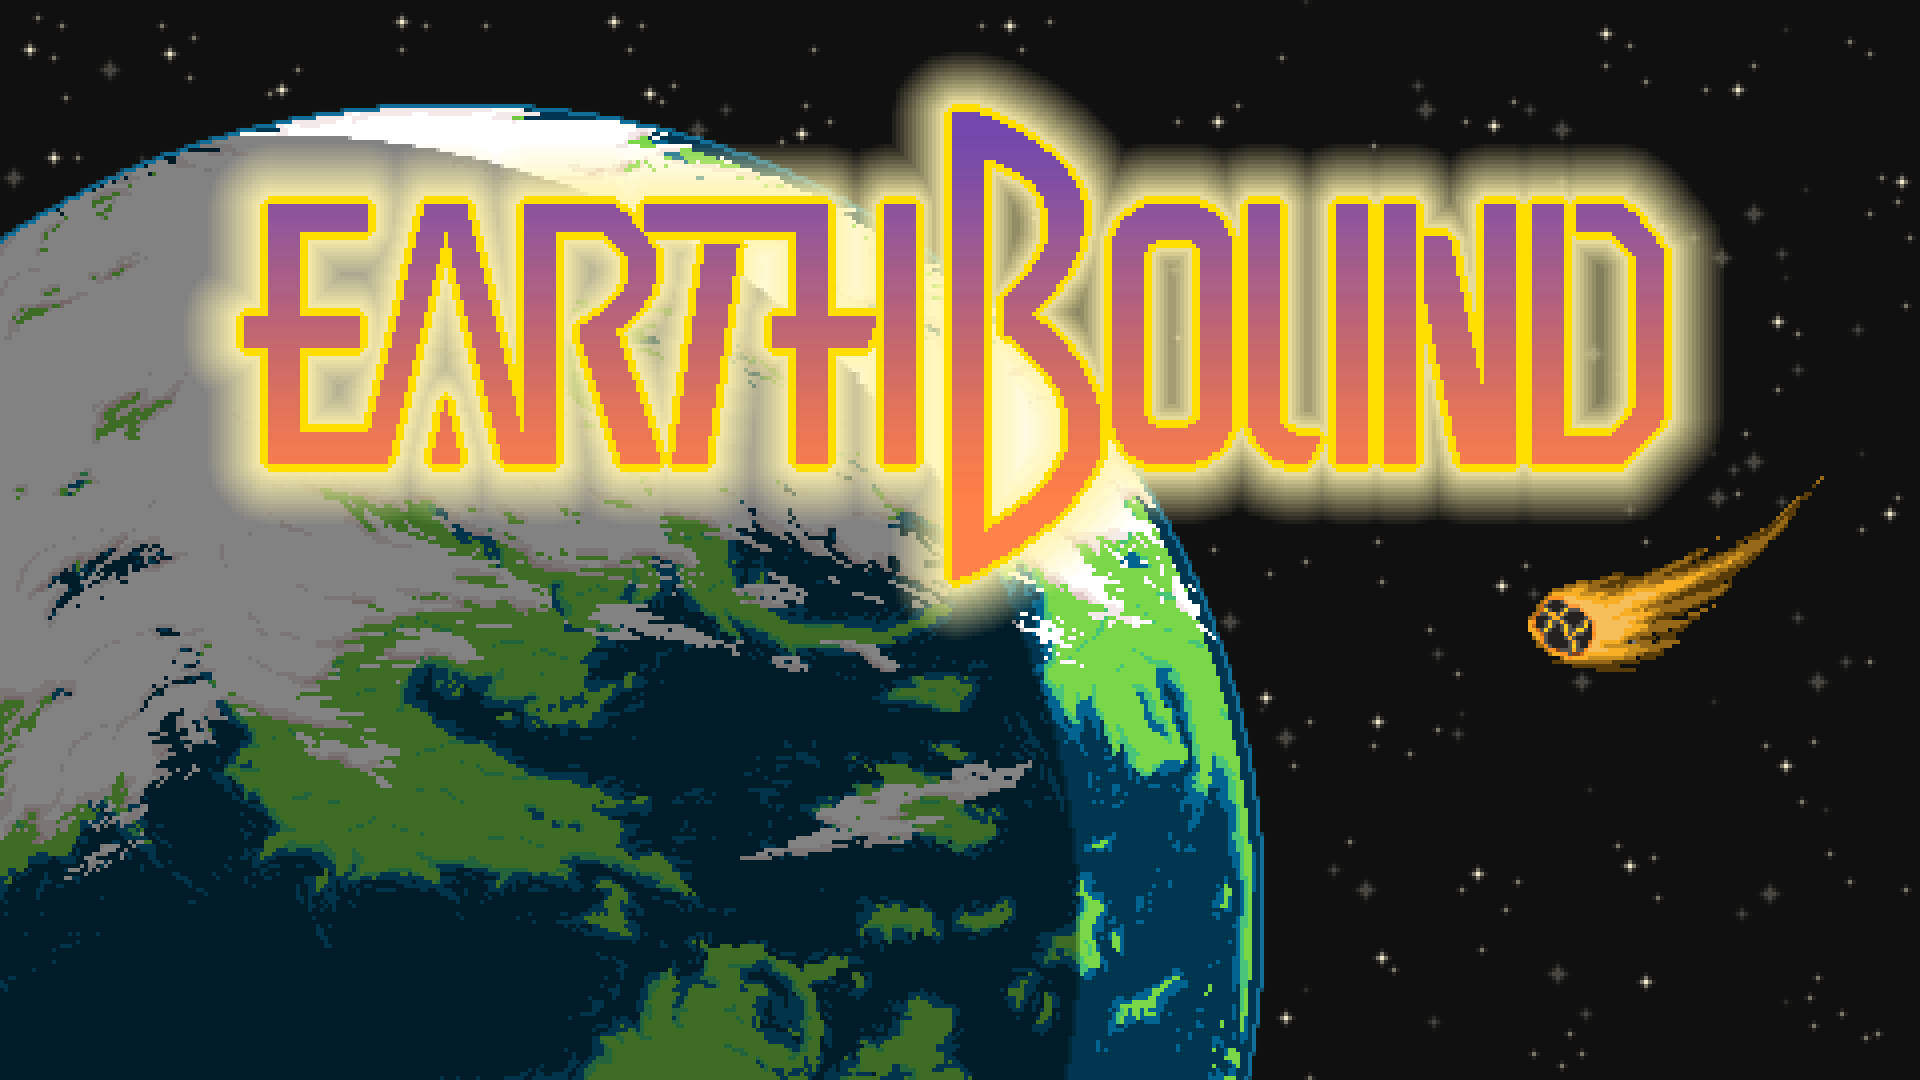 Earthbound Planet Earth And Comet Poster Wallpaper